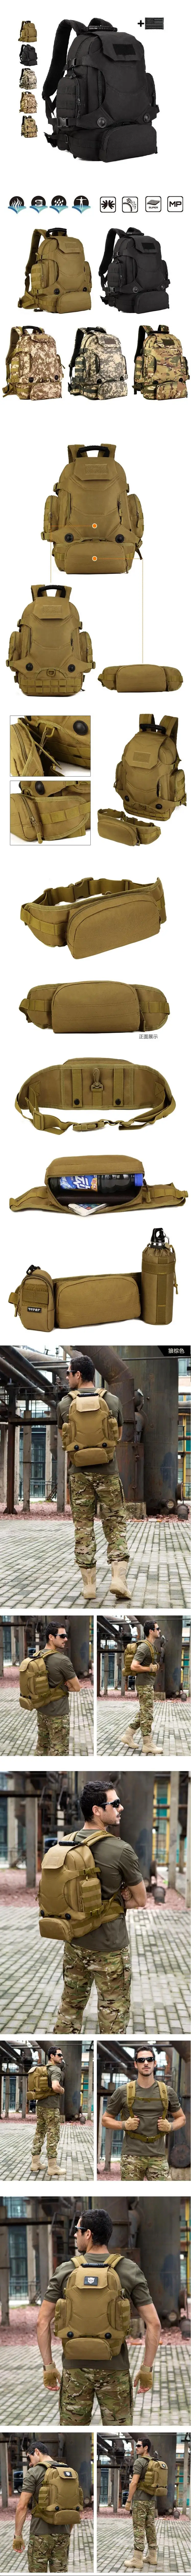 military digital camouflage backpack